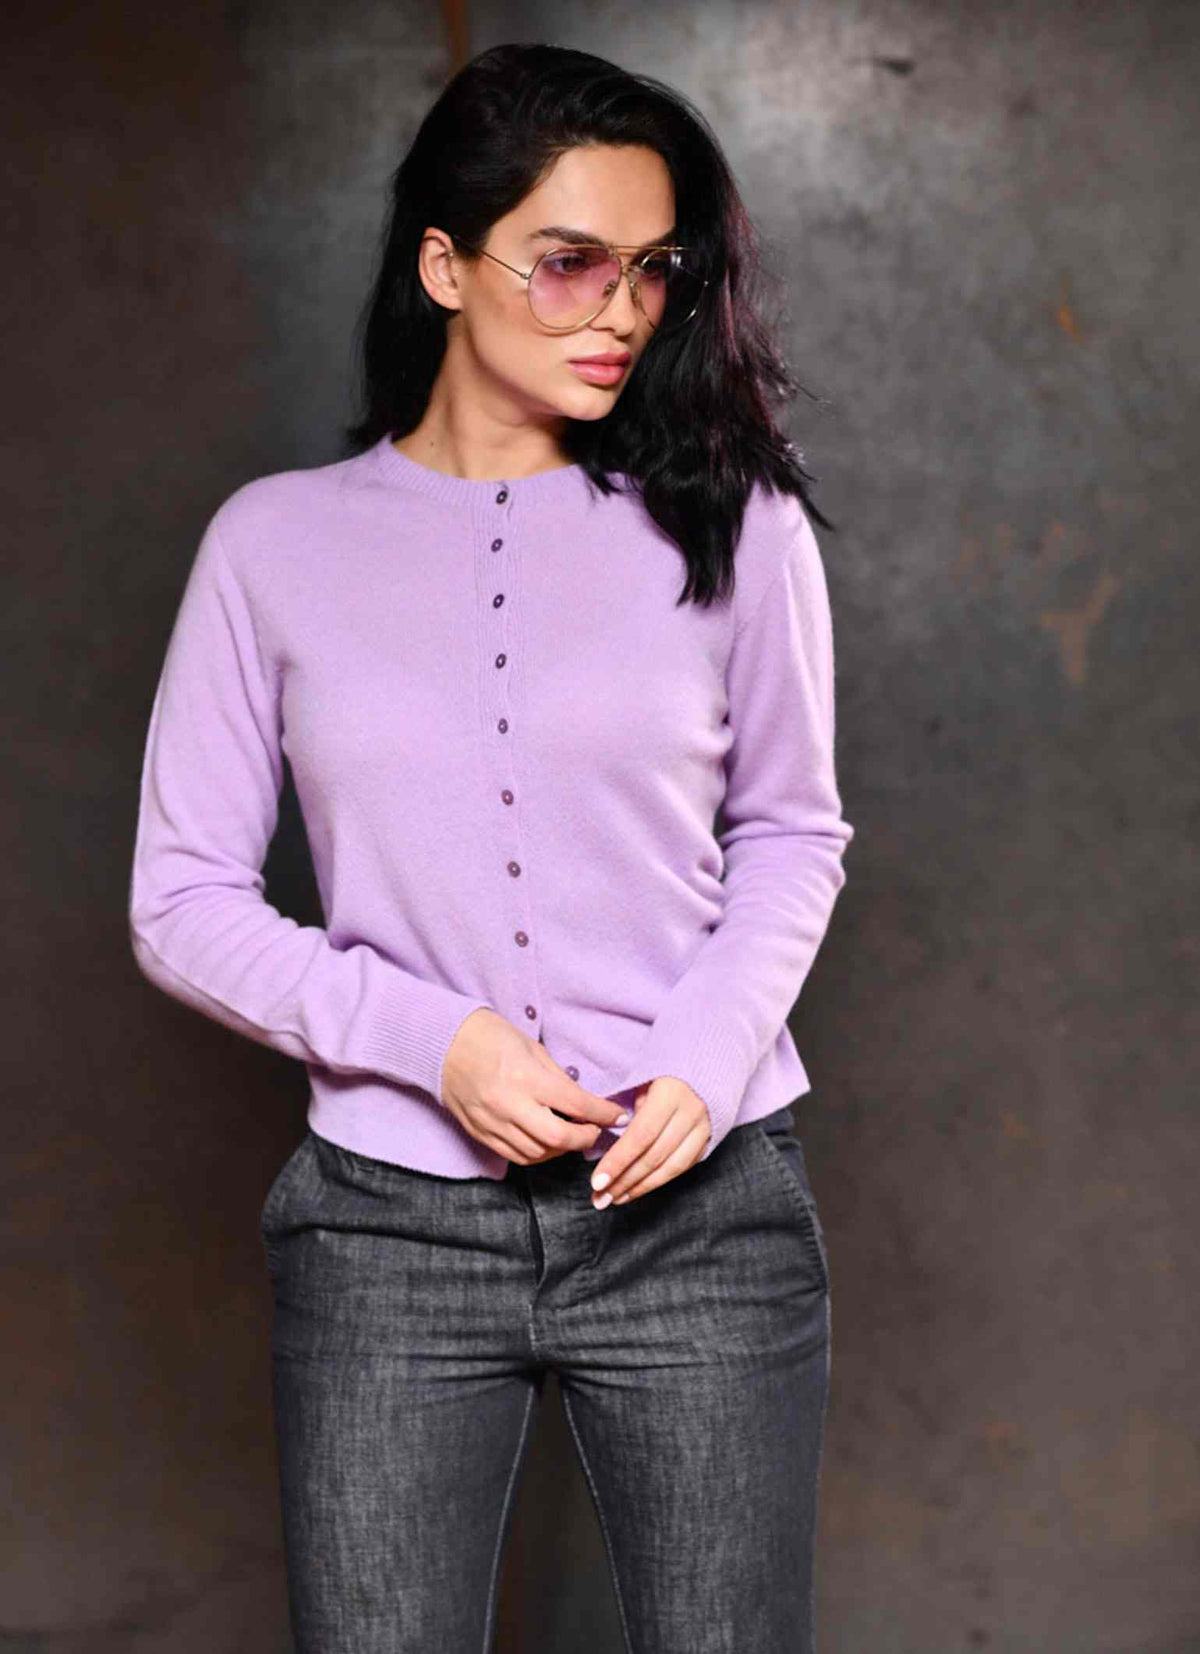 Cardigan cashmere sweater in color violet and matching sunglasses women aviator style